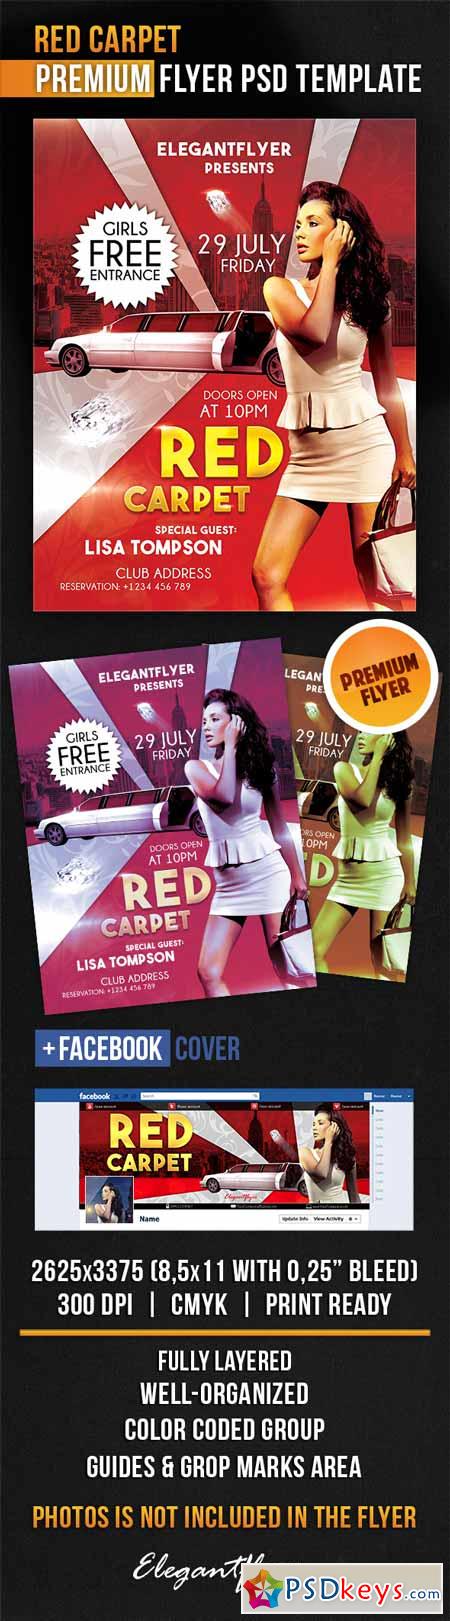 Red Carpet – Flyer PSD Template + Facebook Cover